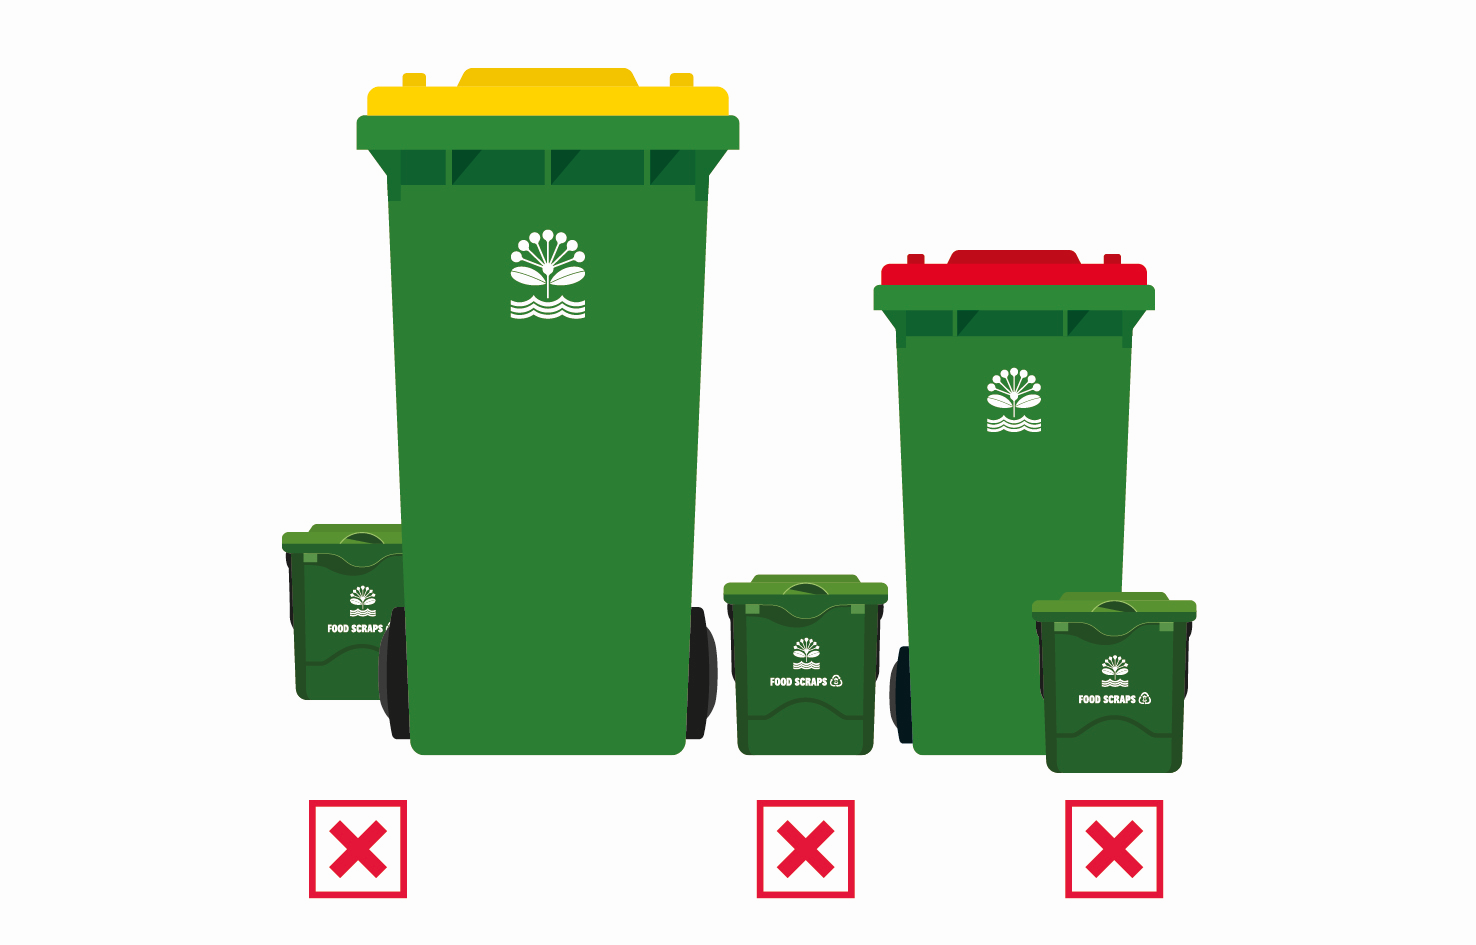 Infographic showing incorrect way to place bins roadside on council rubbish day.